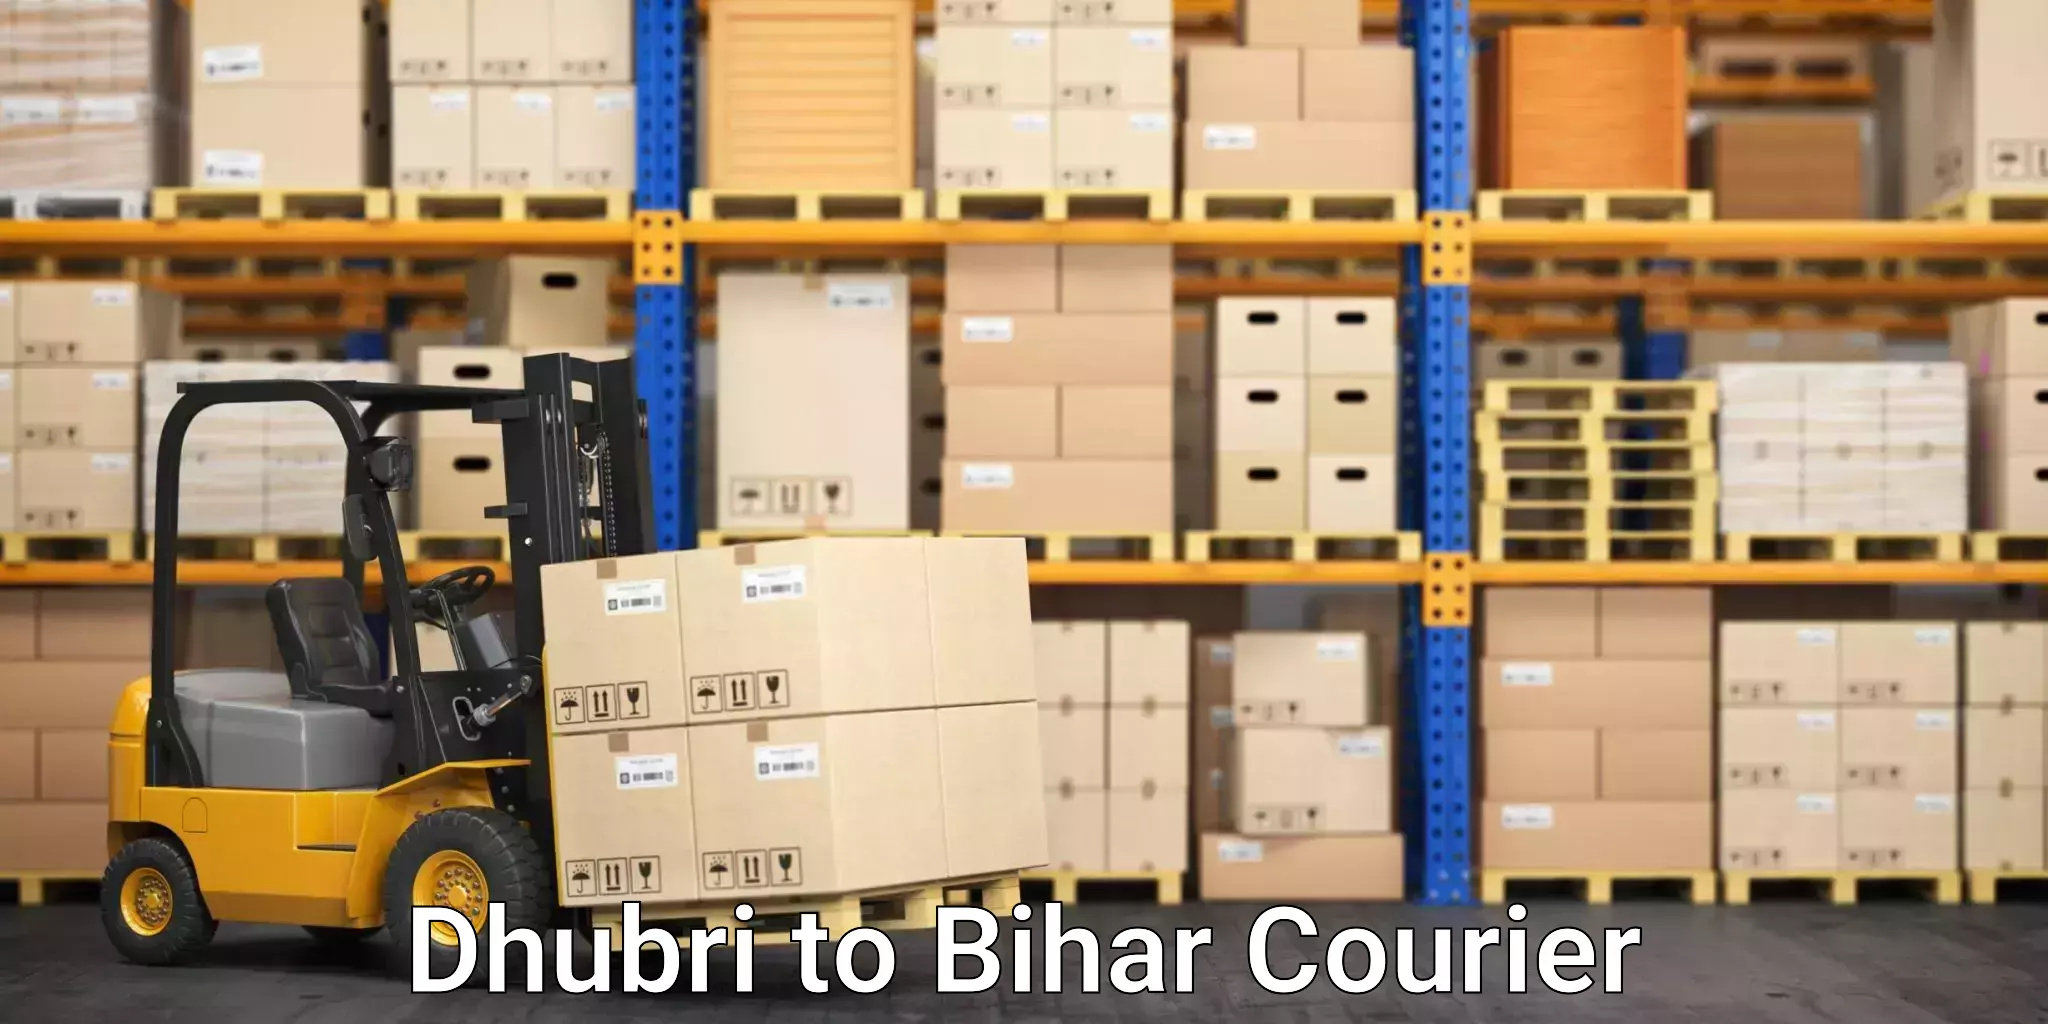 Courier service partnerships Dhubri to Bihar